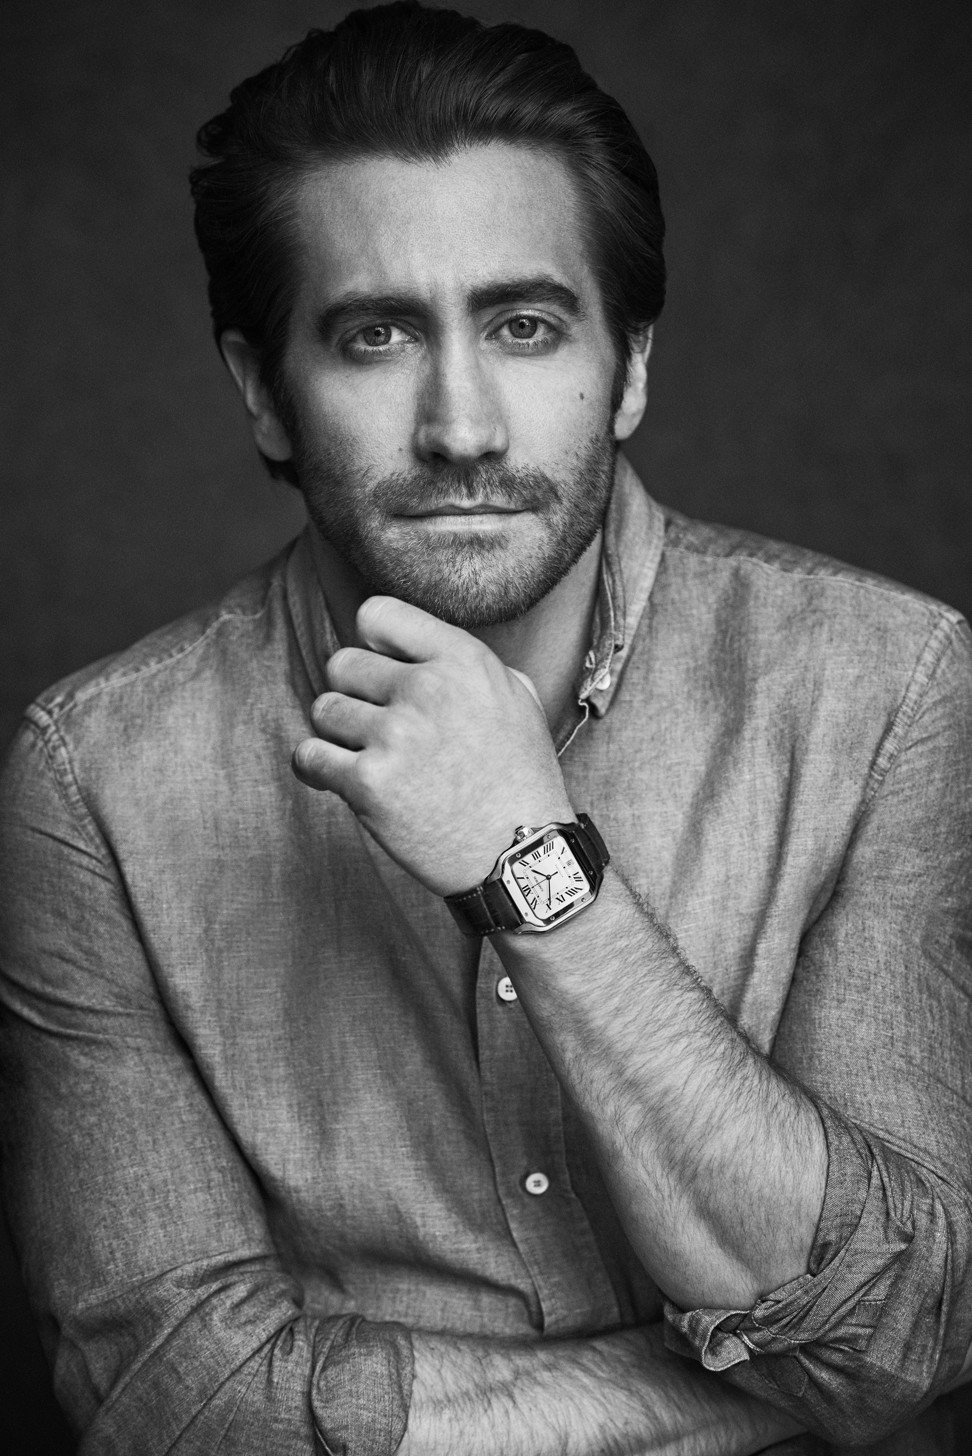 Jake Gyllenhaal set up the Nine Stories production company to continue his love of storytelling.